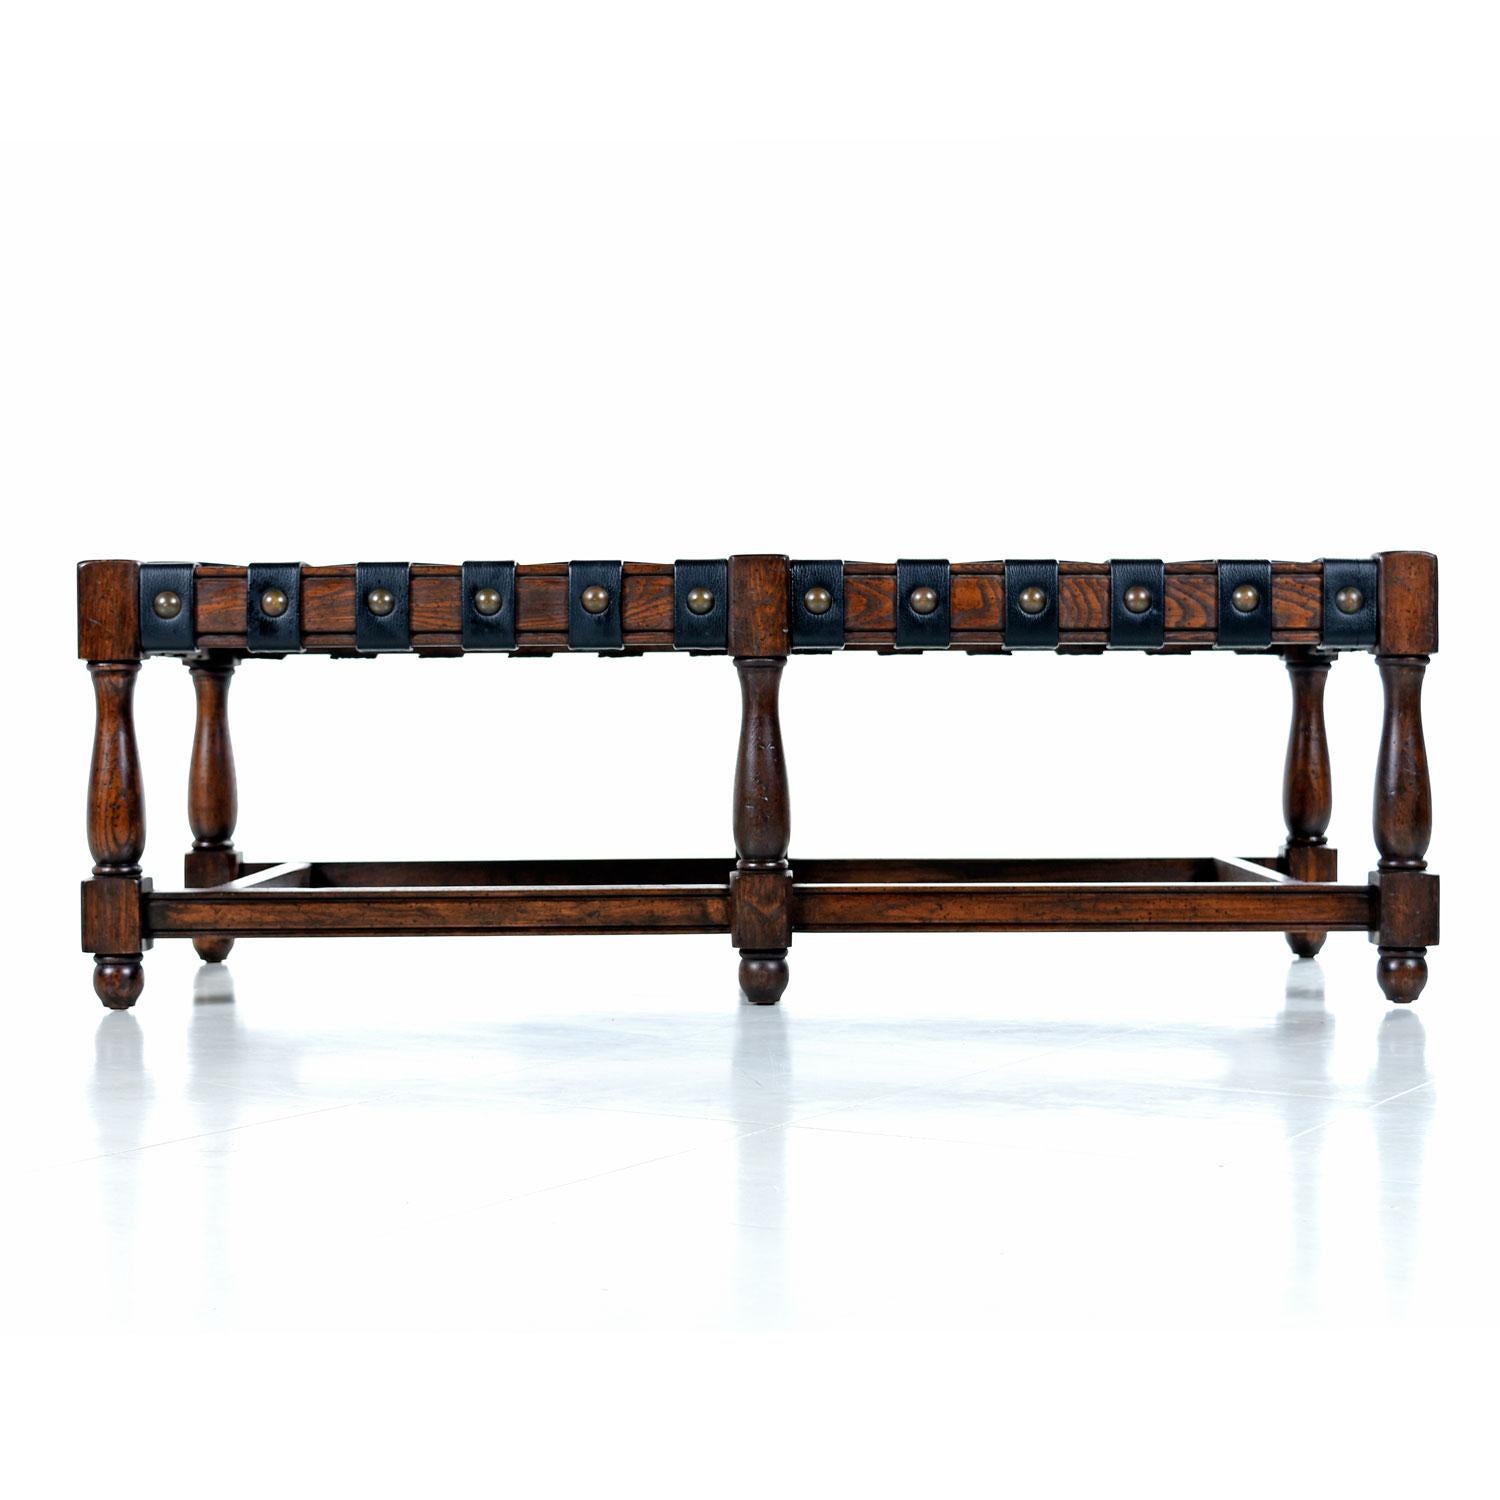 Late 20th Century Vintage Black Leather Strap Gothic Revival Style Solid Oak Bench & Ottomans Set